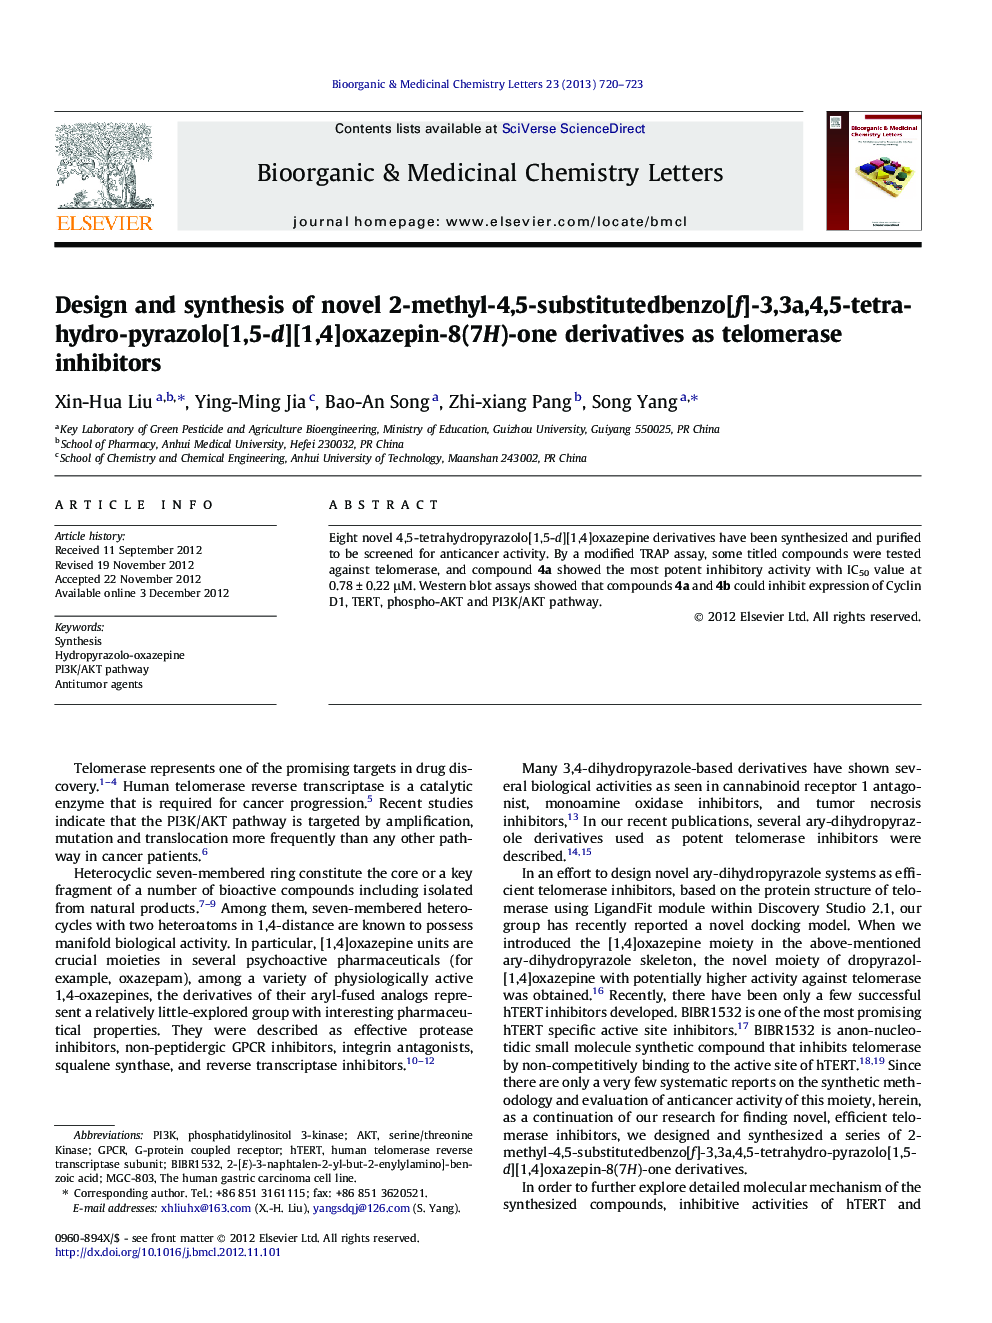 Design and synthesis of novel 2-methyl-4,5-substitutedbenzo[f]-3,3a,4,5-tetrahydro-pyrazolo[1,5-d][1,4]oxazepin-8(7H)-one derivatives as telomerase inhibitors